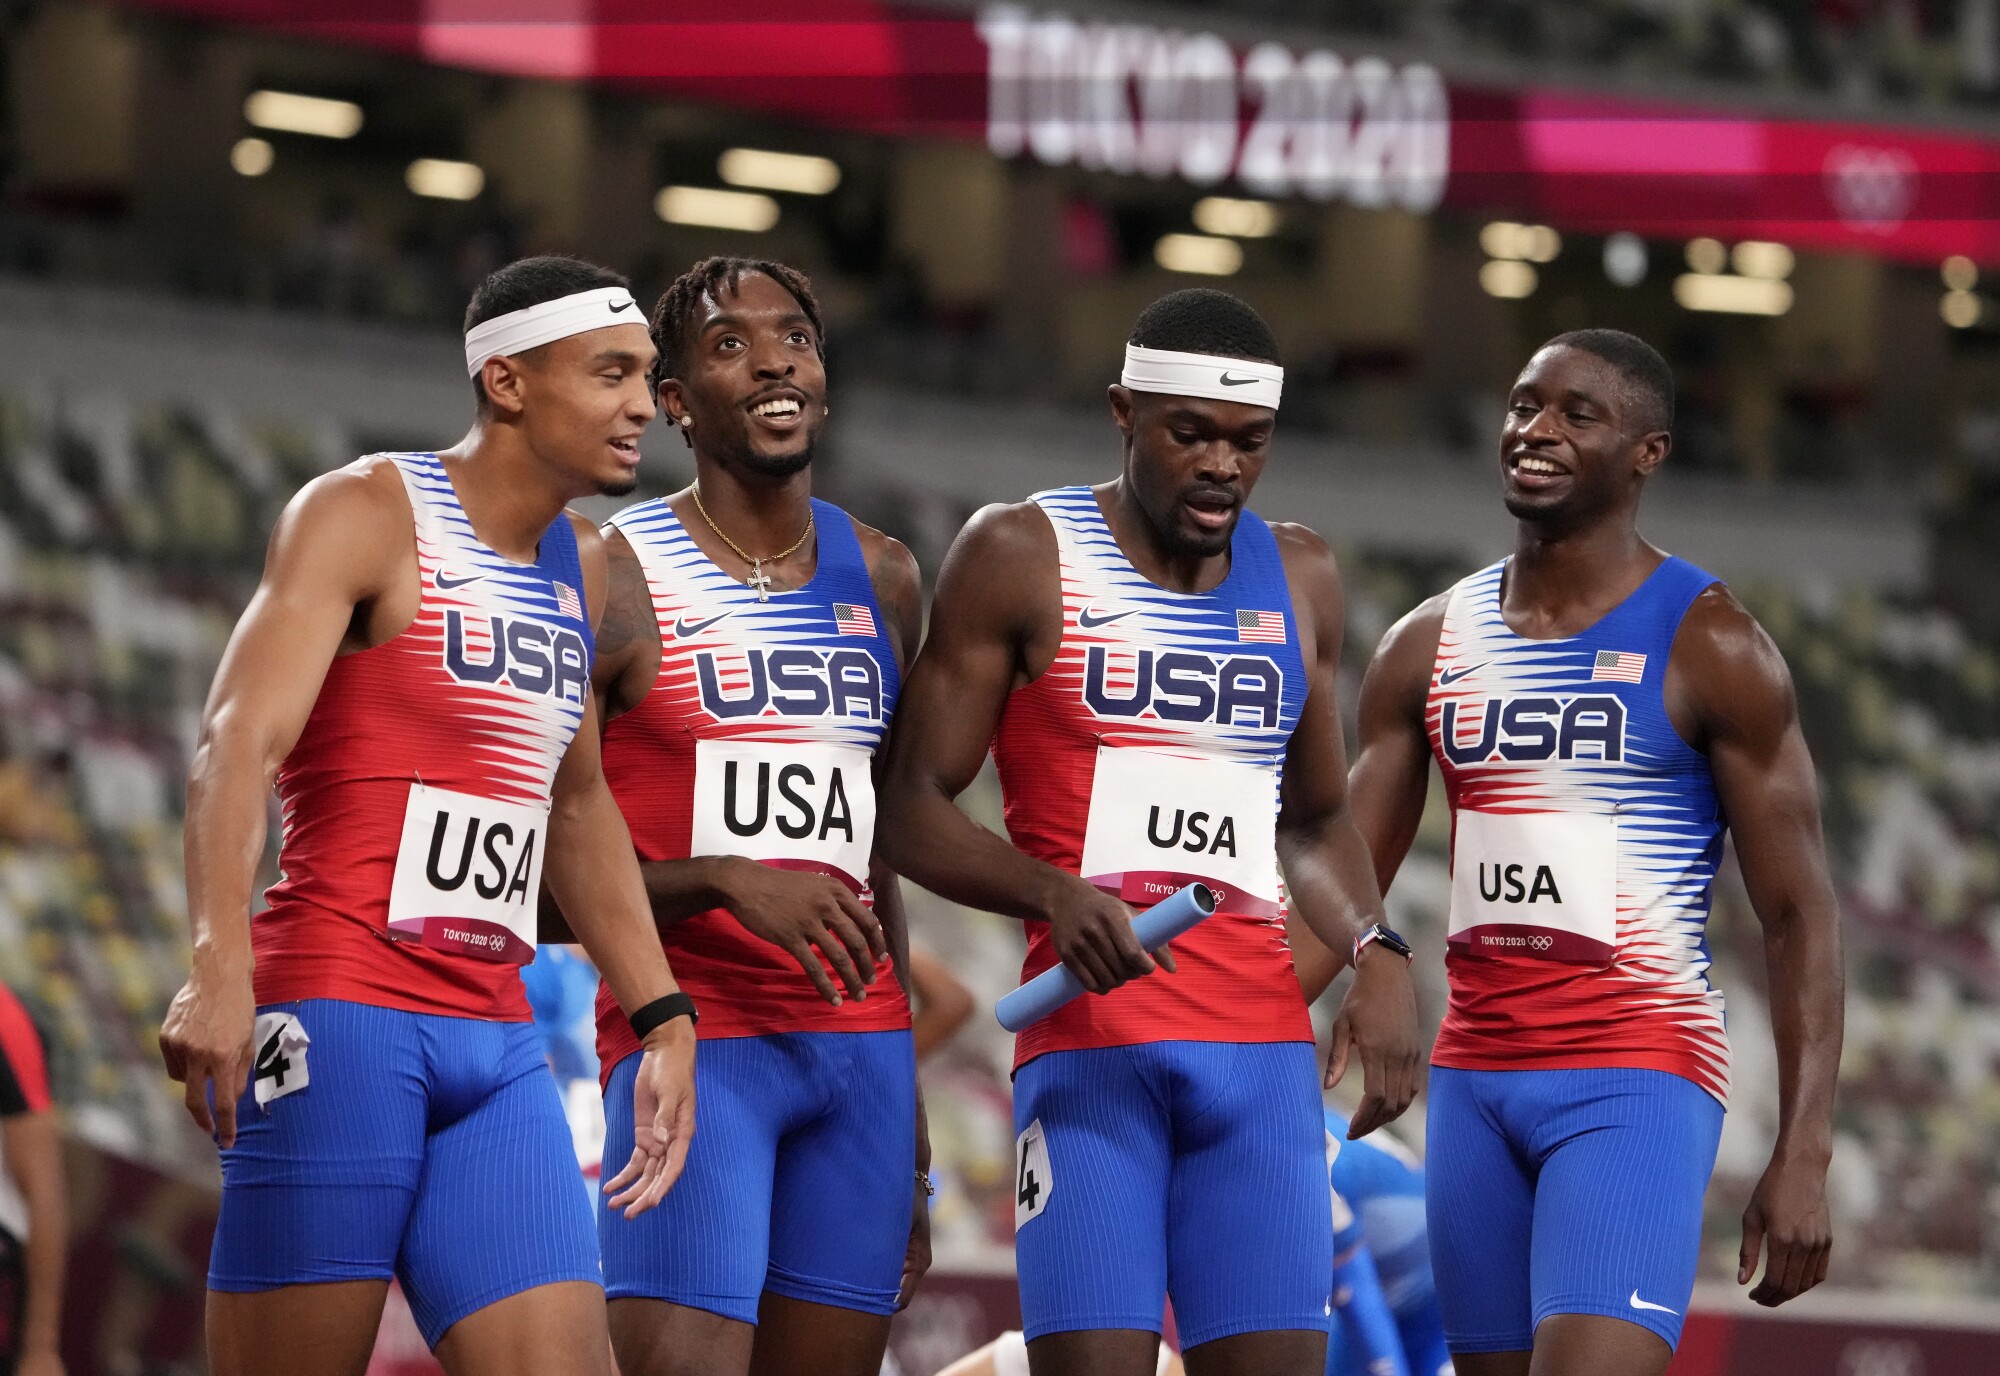 Michael Norman, left, and his American partners celebrate after winning the gold medal in the men's 4 × 400-meter relay.